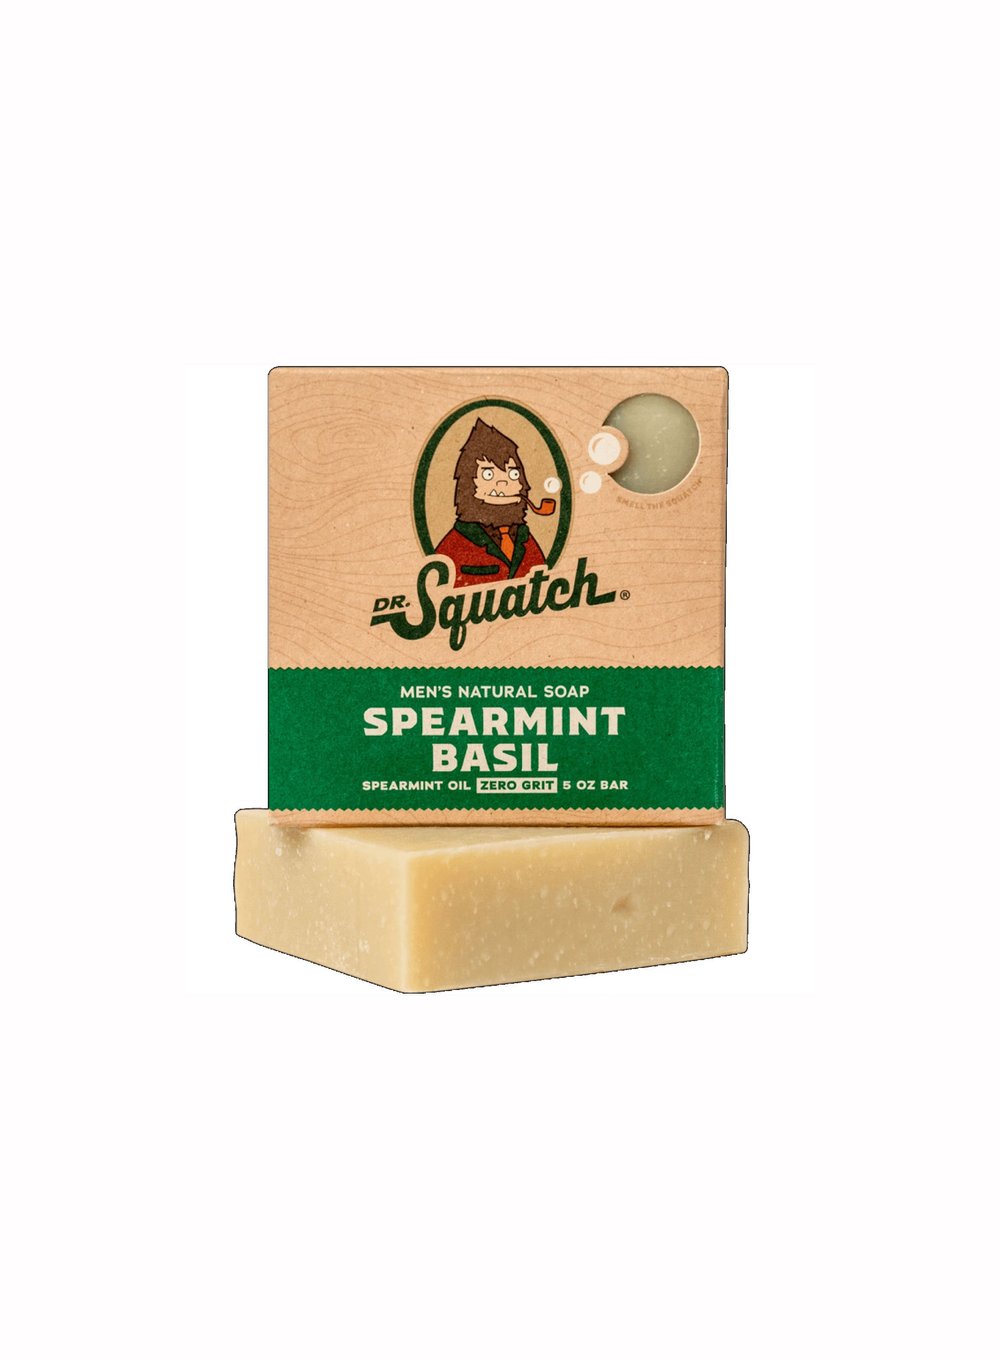 Dr. Squatch Birchwood Breeze Bar Soap — Lost Objects, Found Treasures